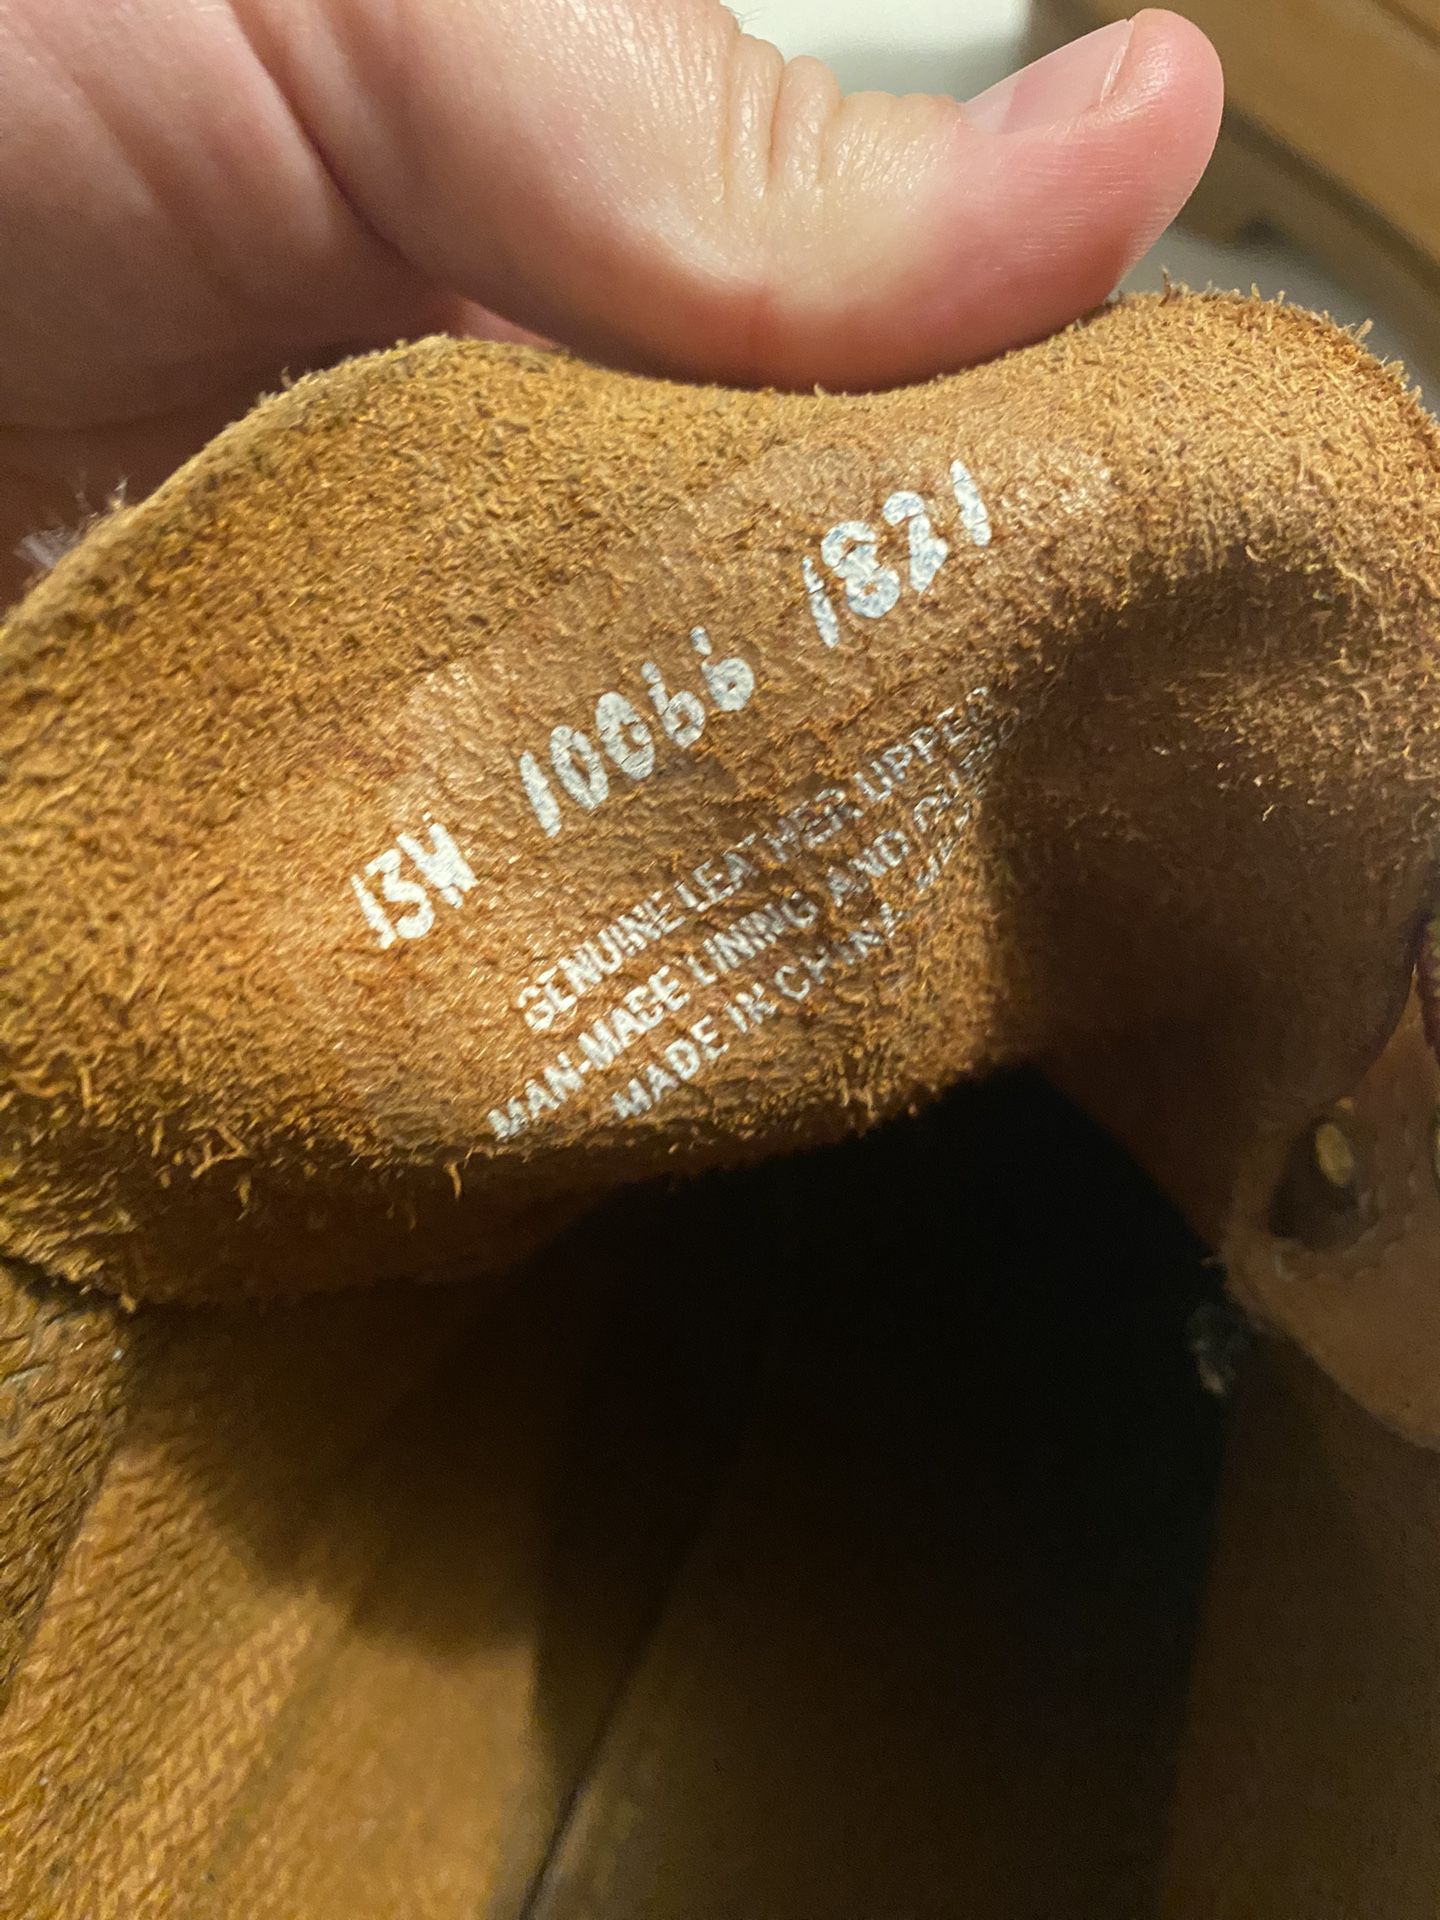 Timberland Boots Adult size 13 New? EUC Fast Ship Tan With Tag 10066 1821  USA for Sale in Westmont, IL - OfferUp